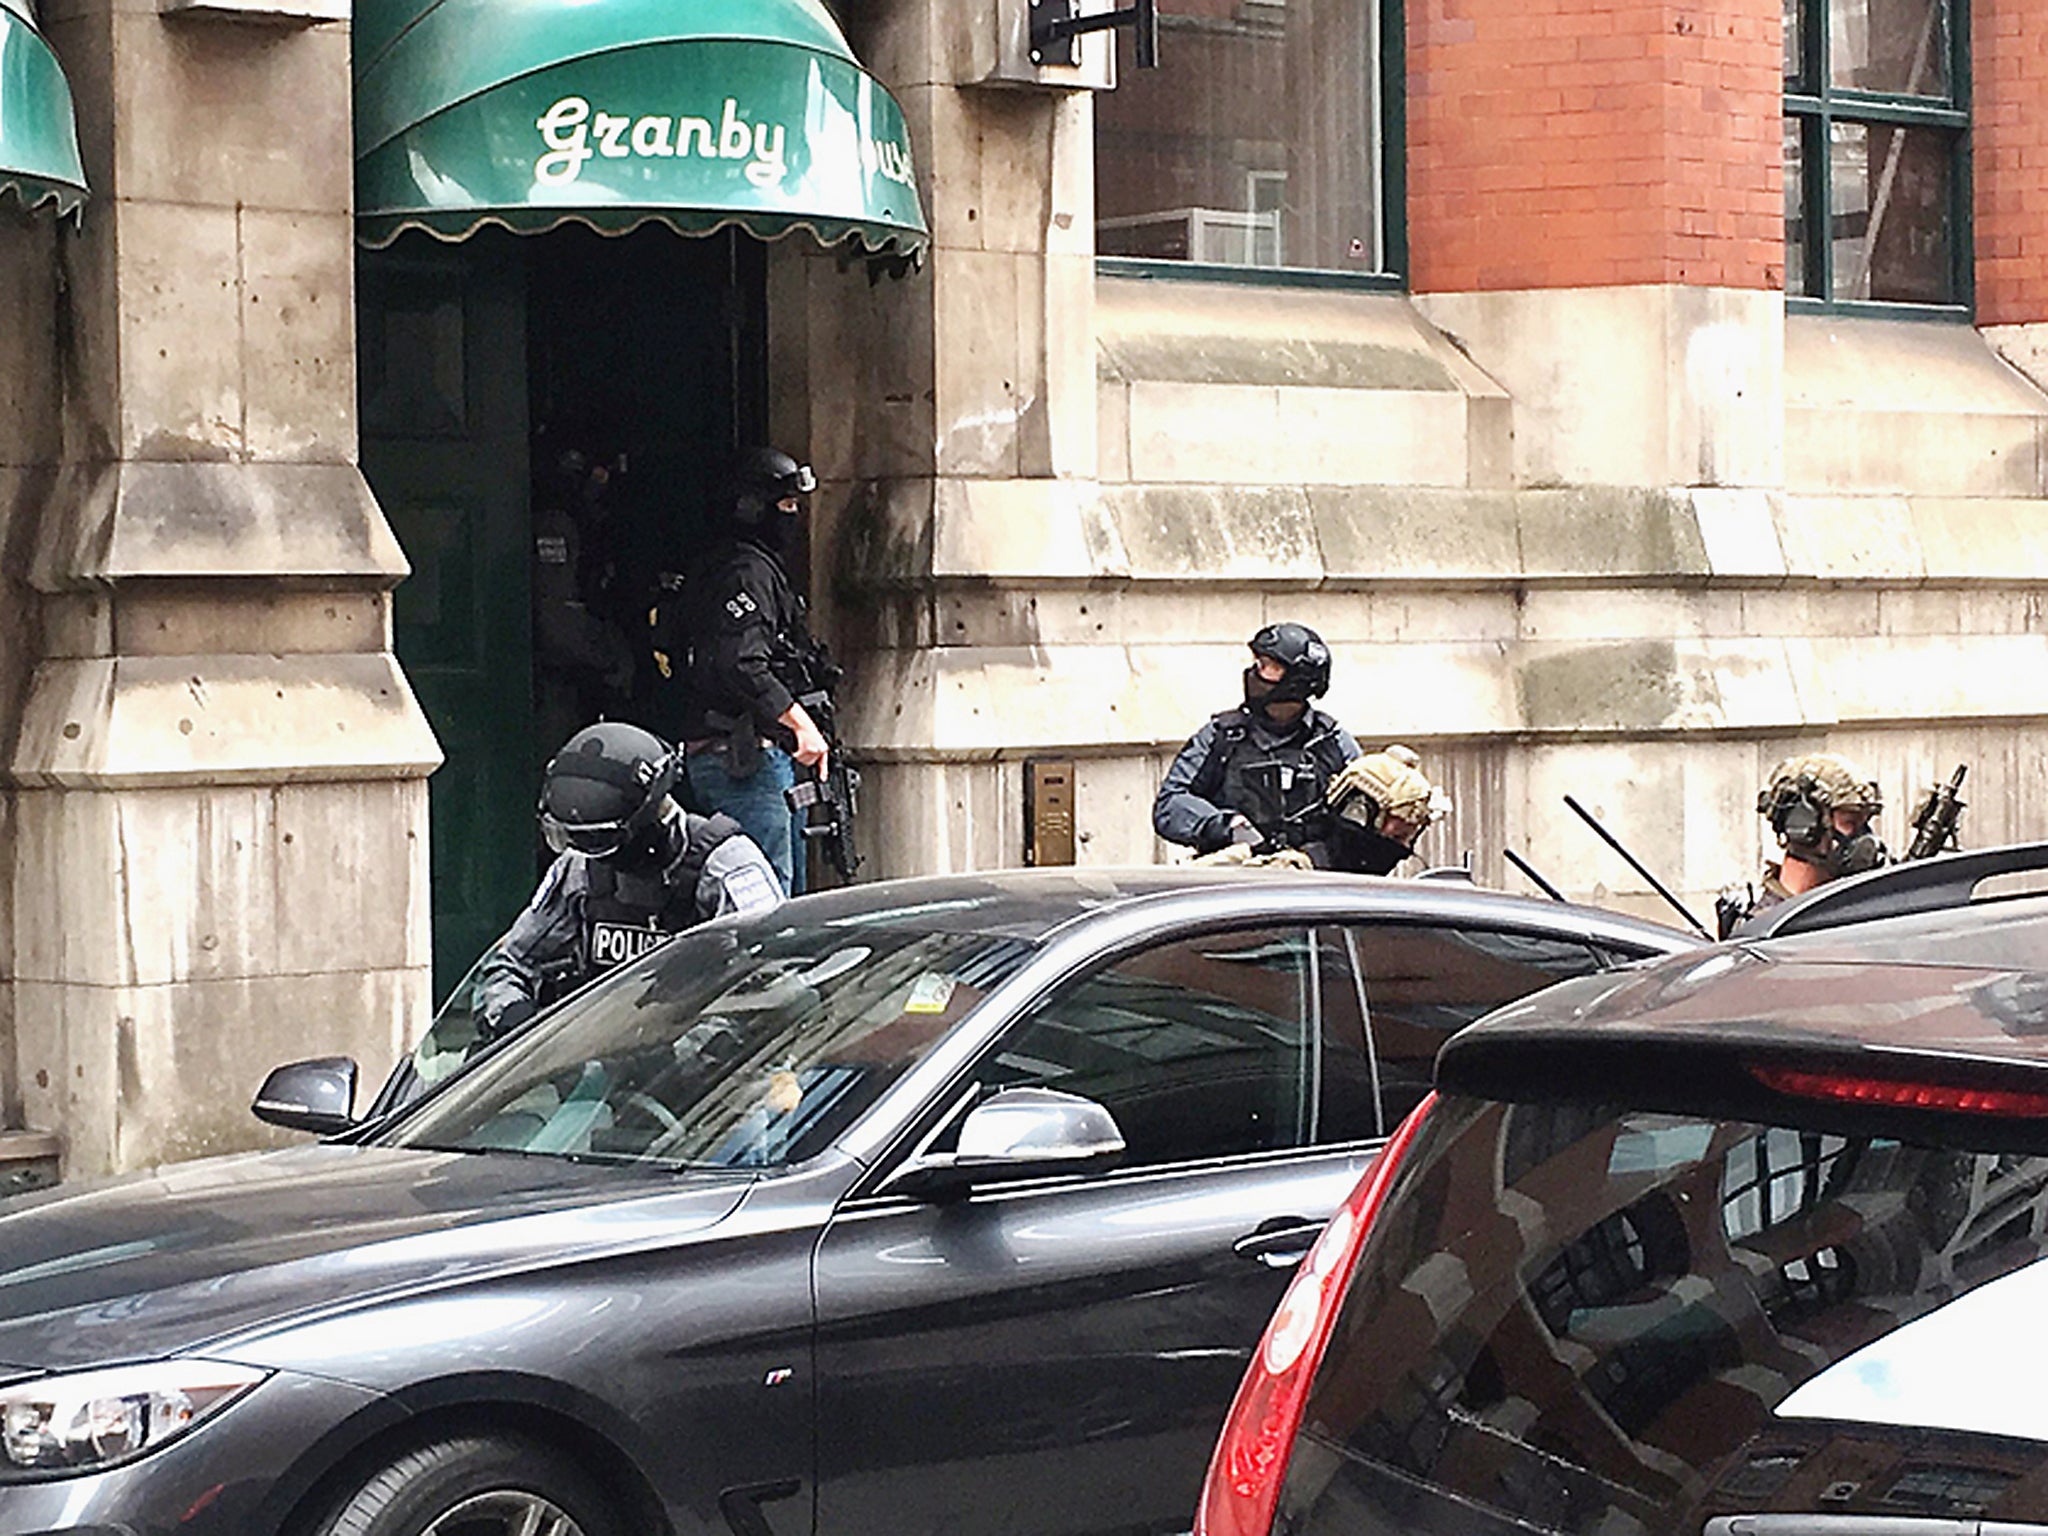 Police and army personnel raided the flat in Granby Row after using explosives to gain entry